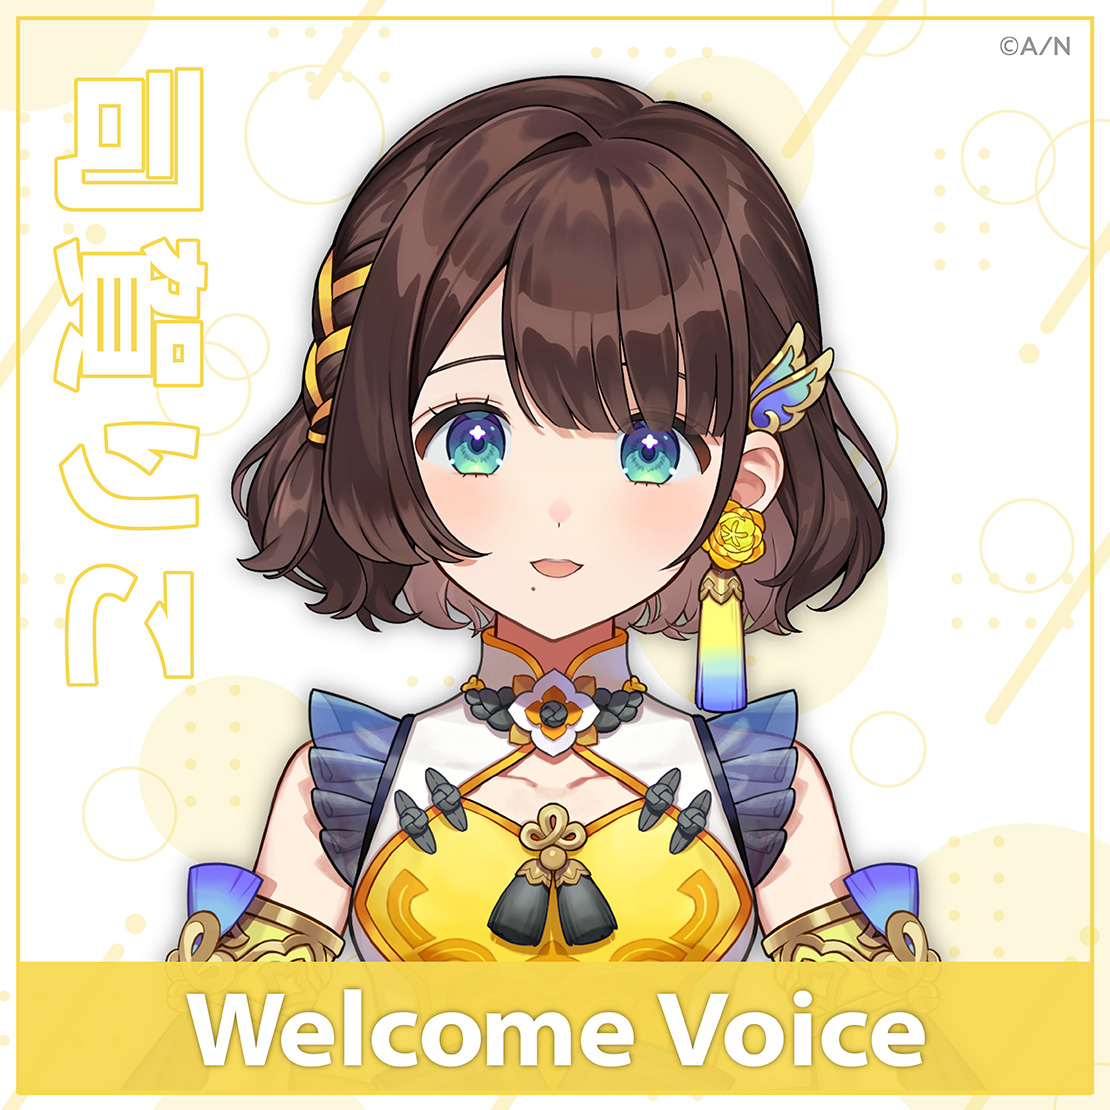 【Welcome Voice】司賀りこ